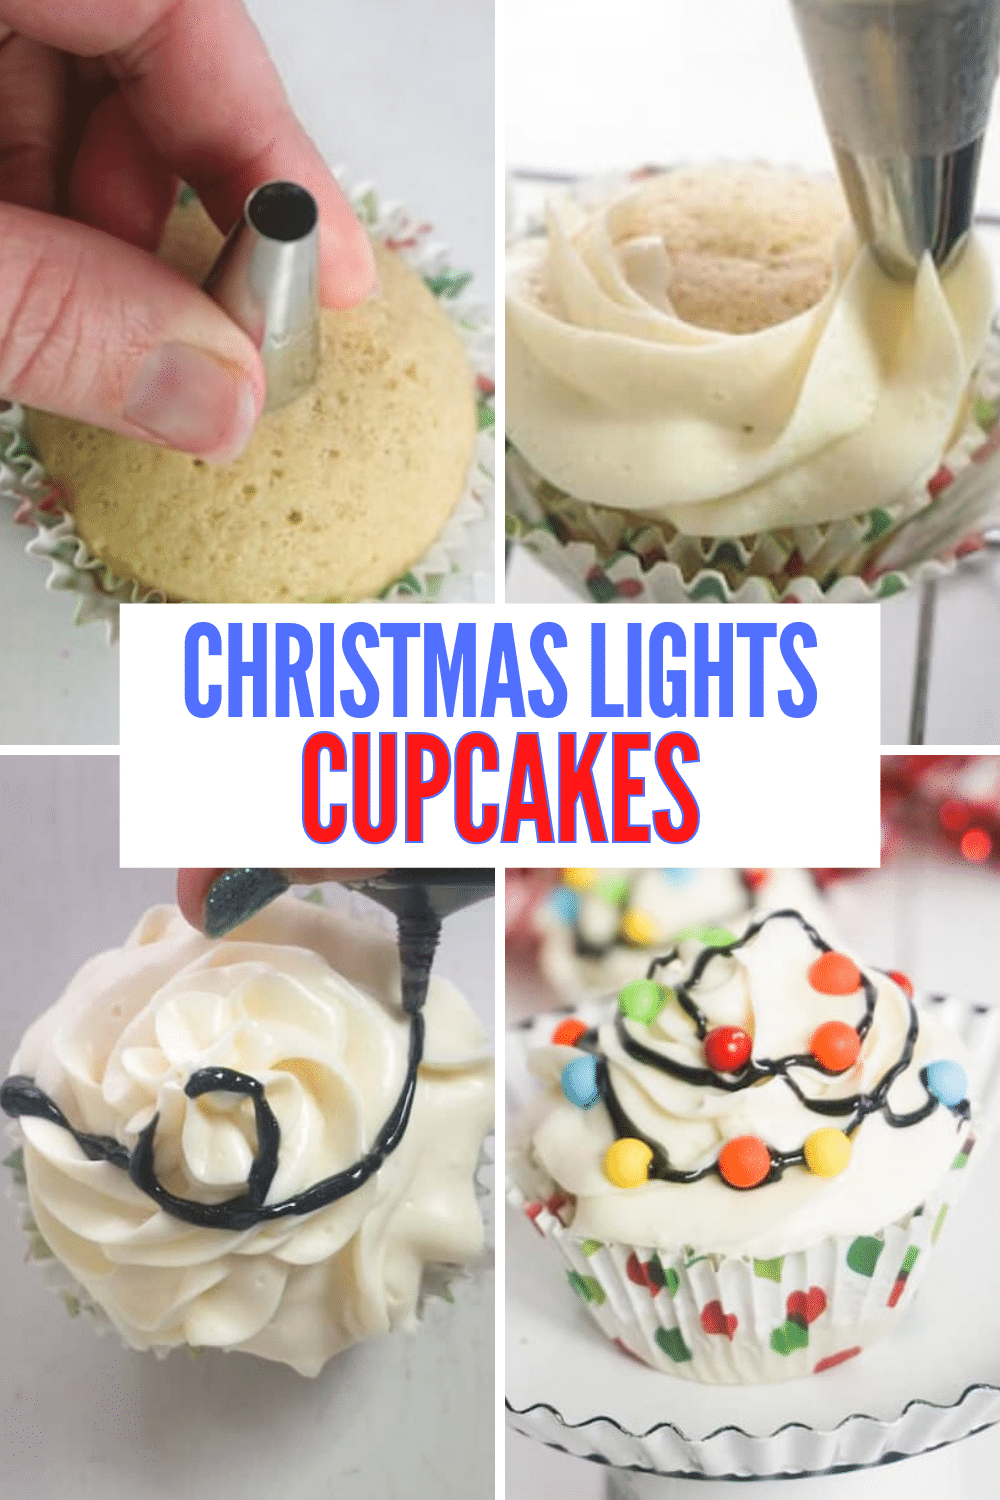 I love how quickly these easy Christmas Lights Cupcakes came together. They're literally about the easiest Christmas cupcakes you can make! #christmascupcakes #christmaslightscupcakes via @wondermomwannab